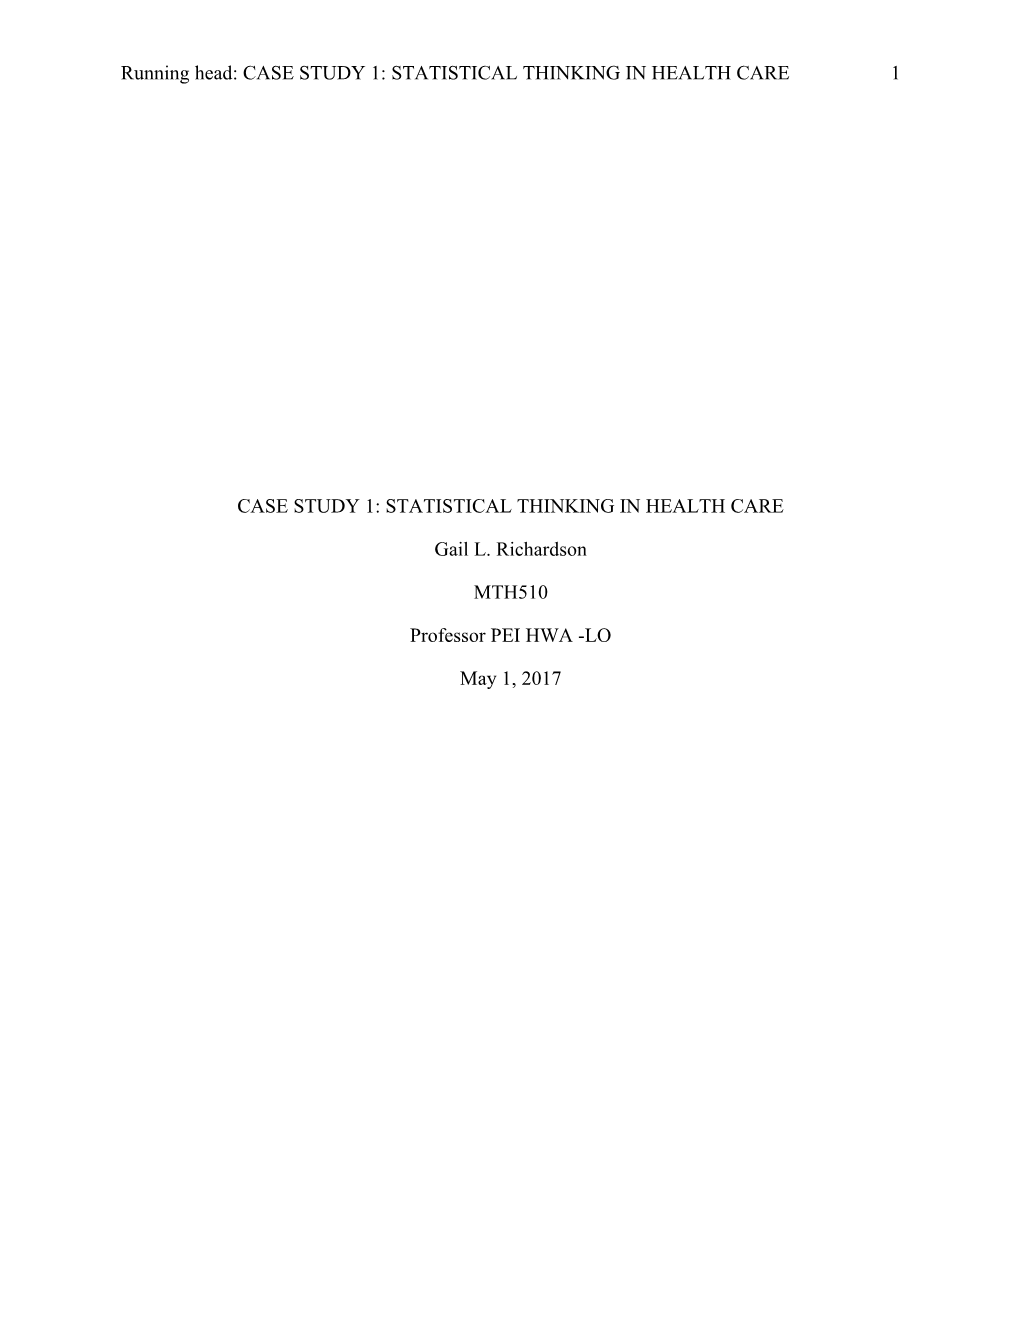 Case Study 1: Statistical Thinking in Health Care 1